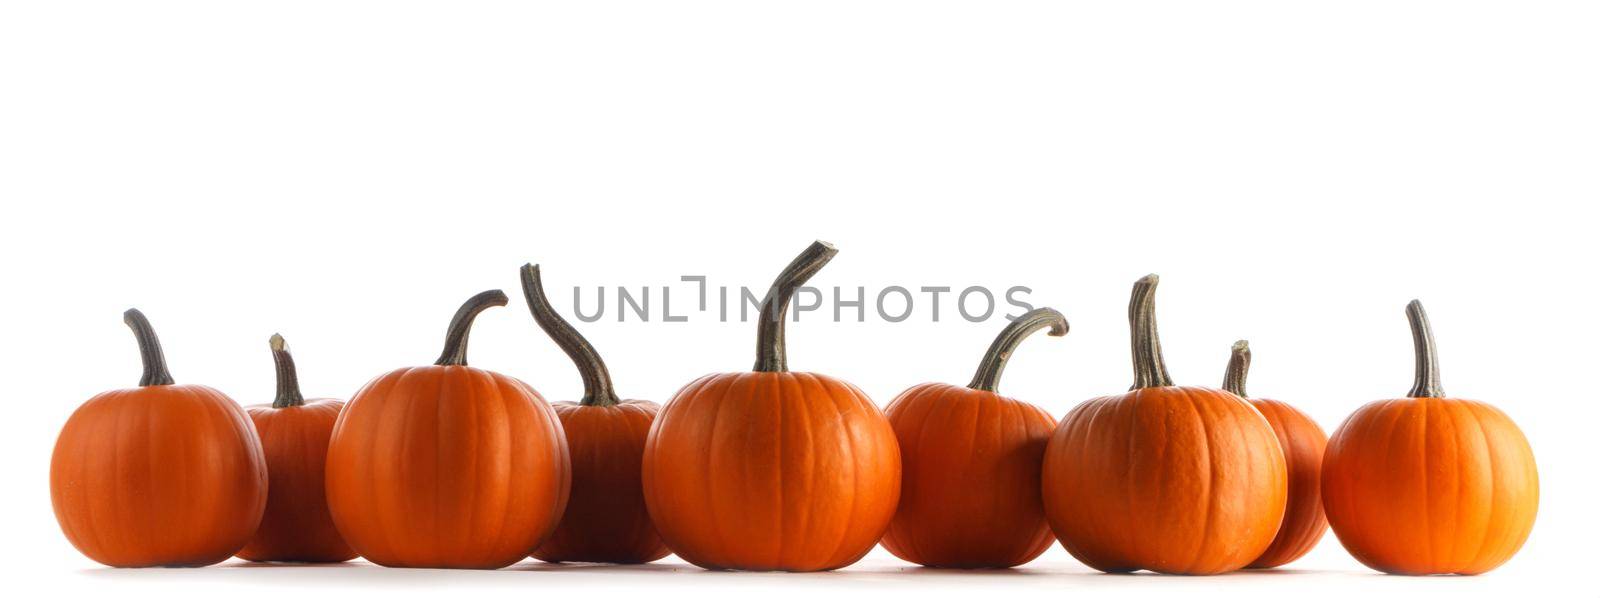 Pumpkins in a row isolated on white by Yellowj